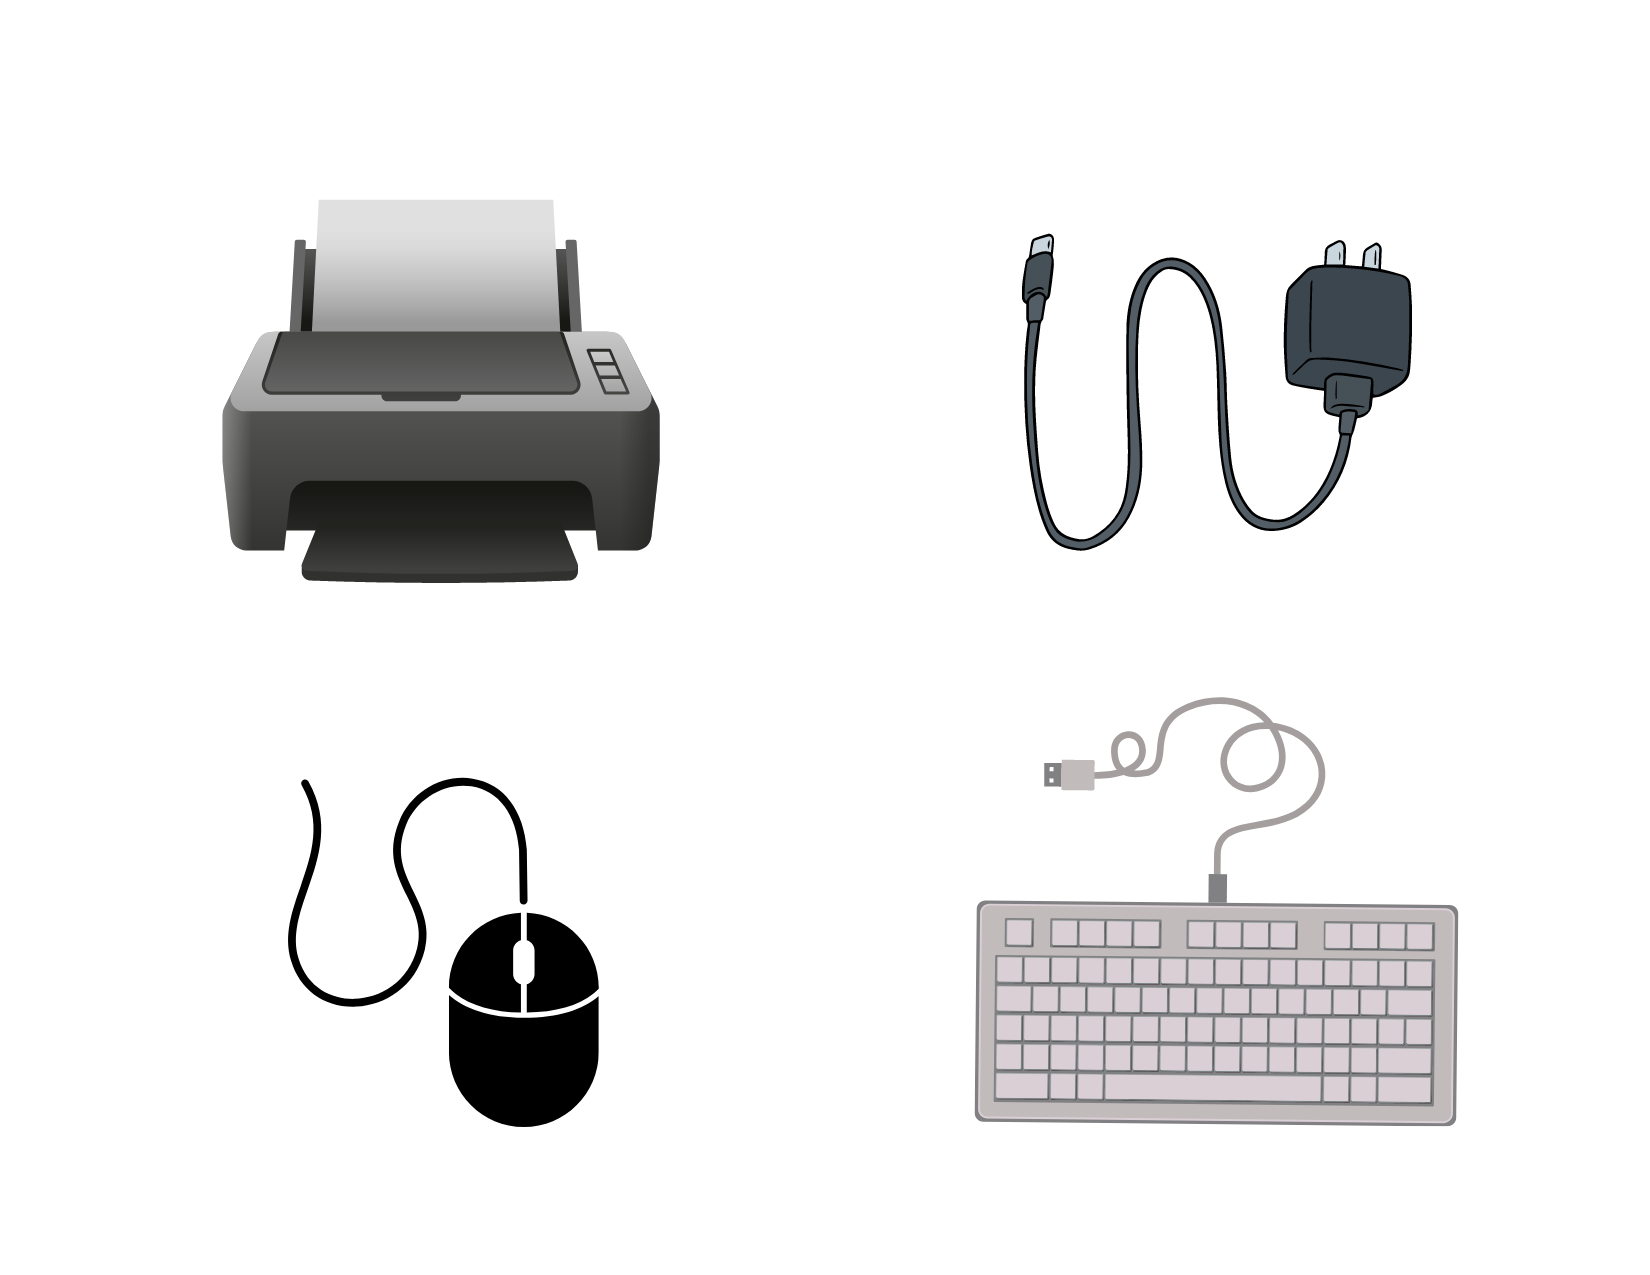 Images of a computer mouse, computer keyboard, phone charger, and printer.